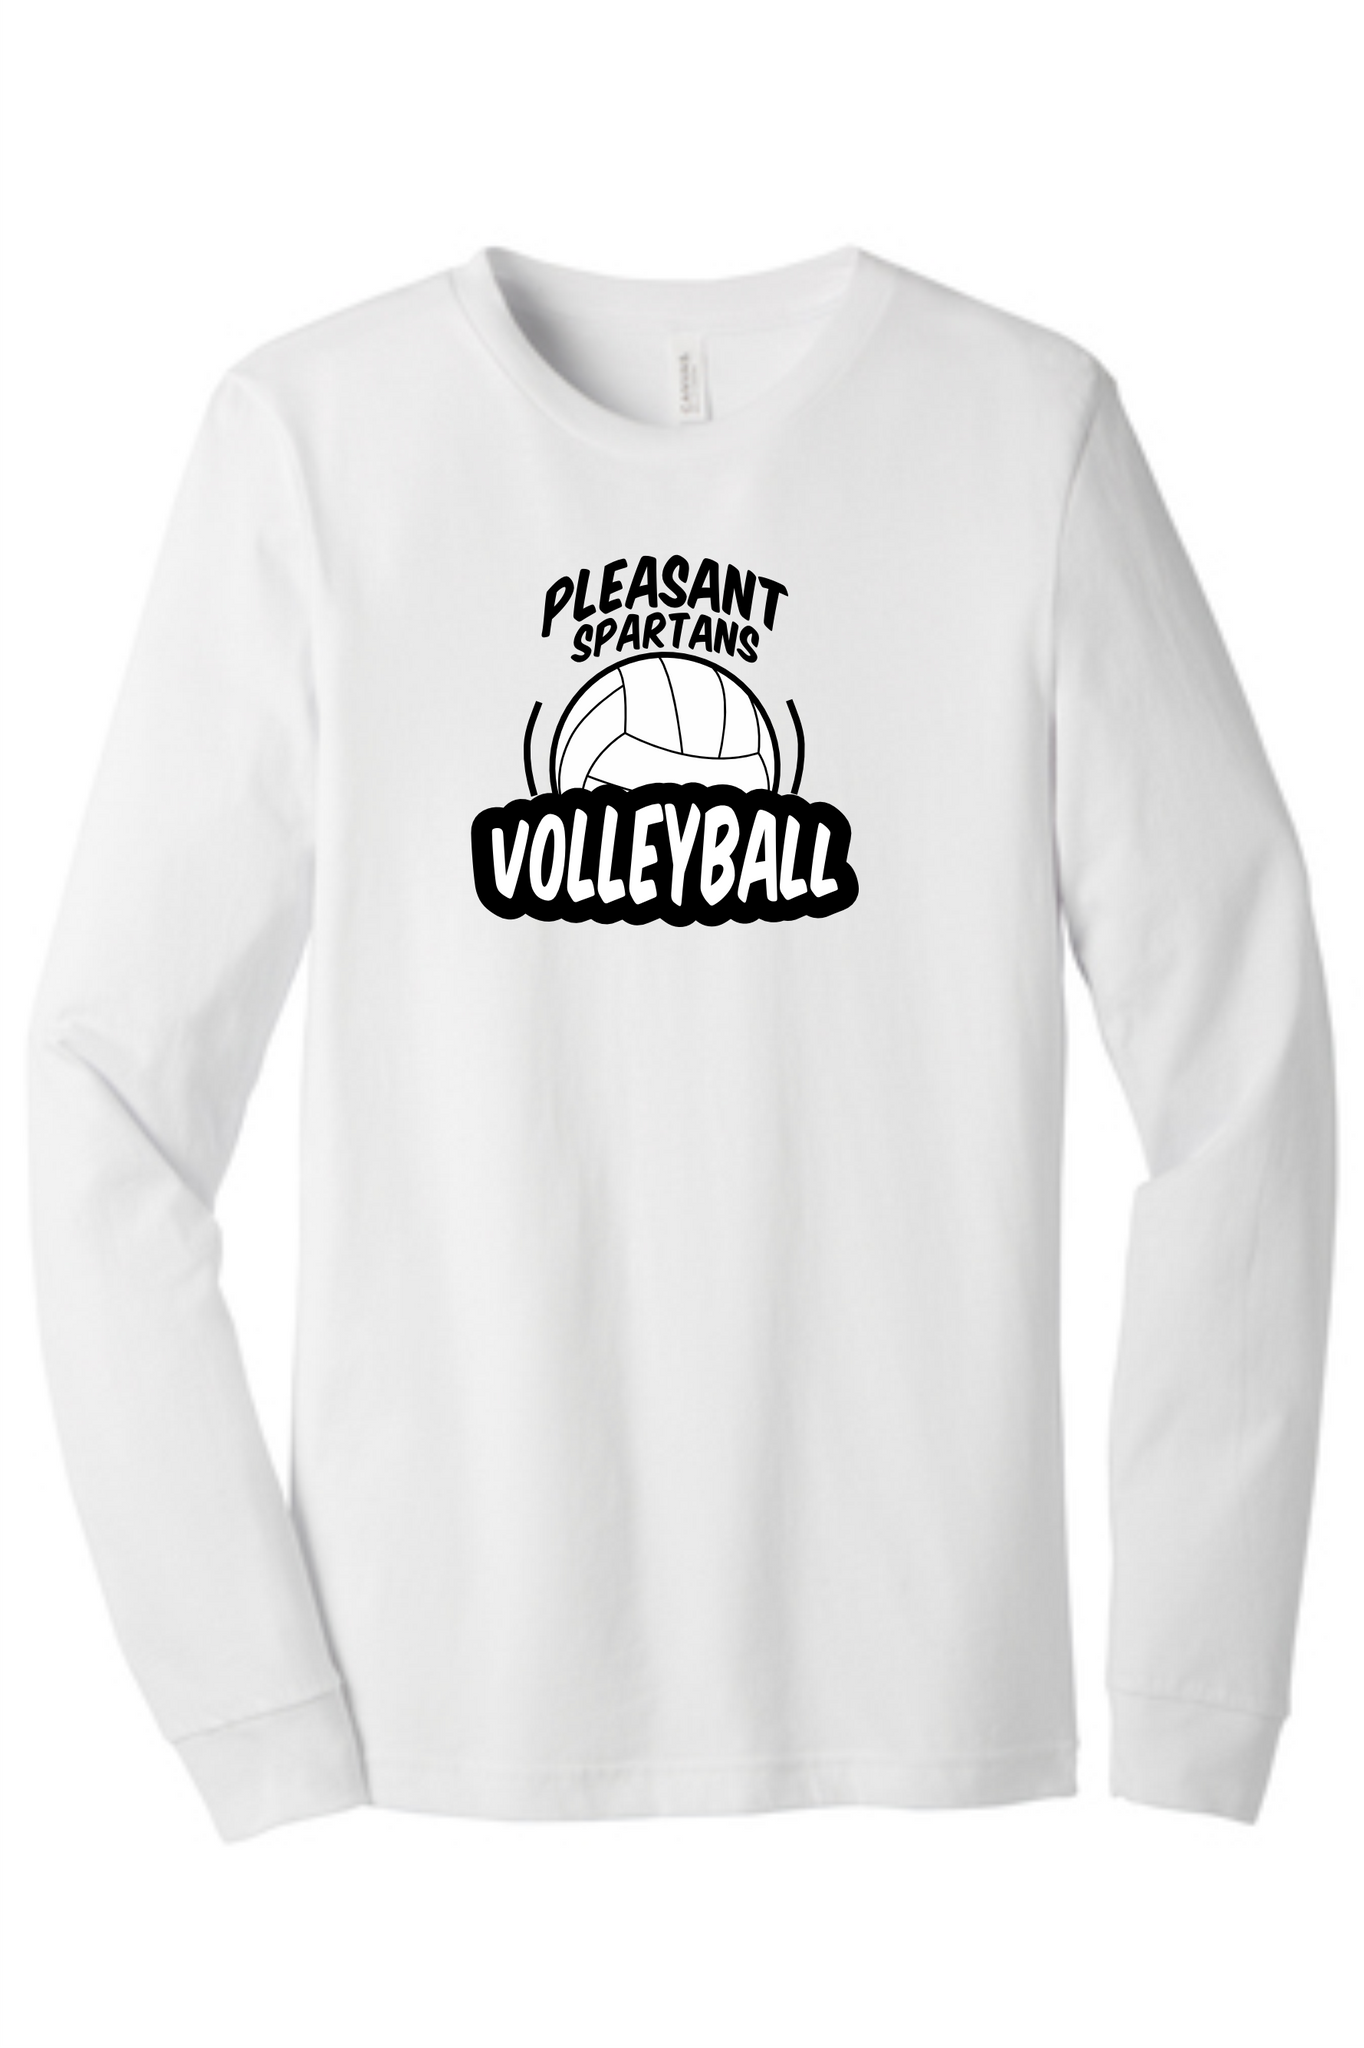 Pleasant Volleyball